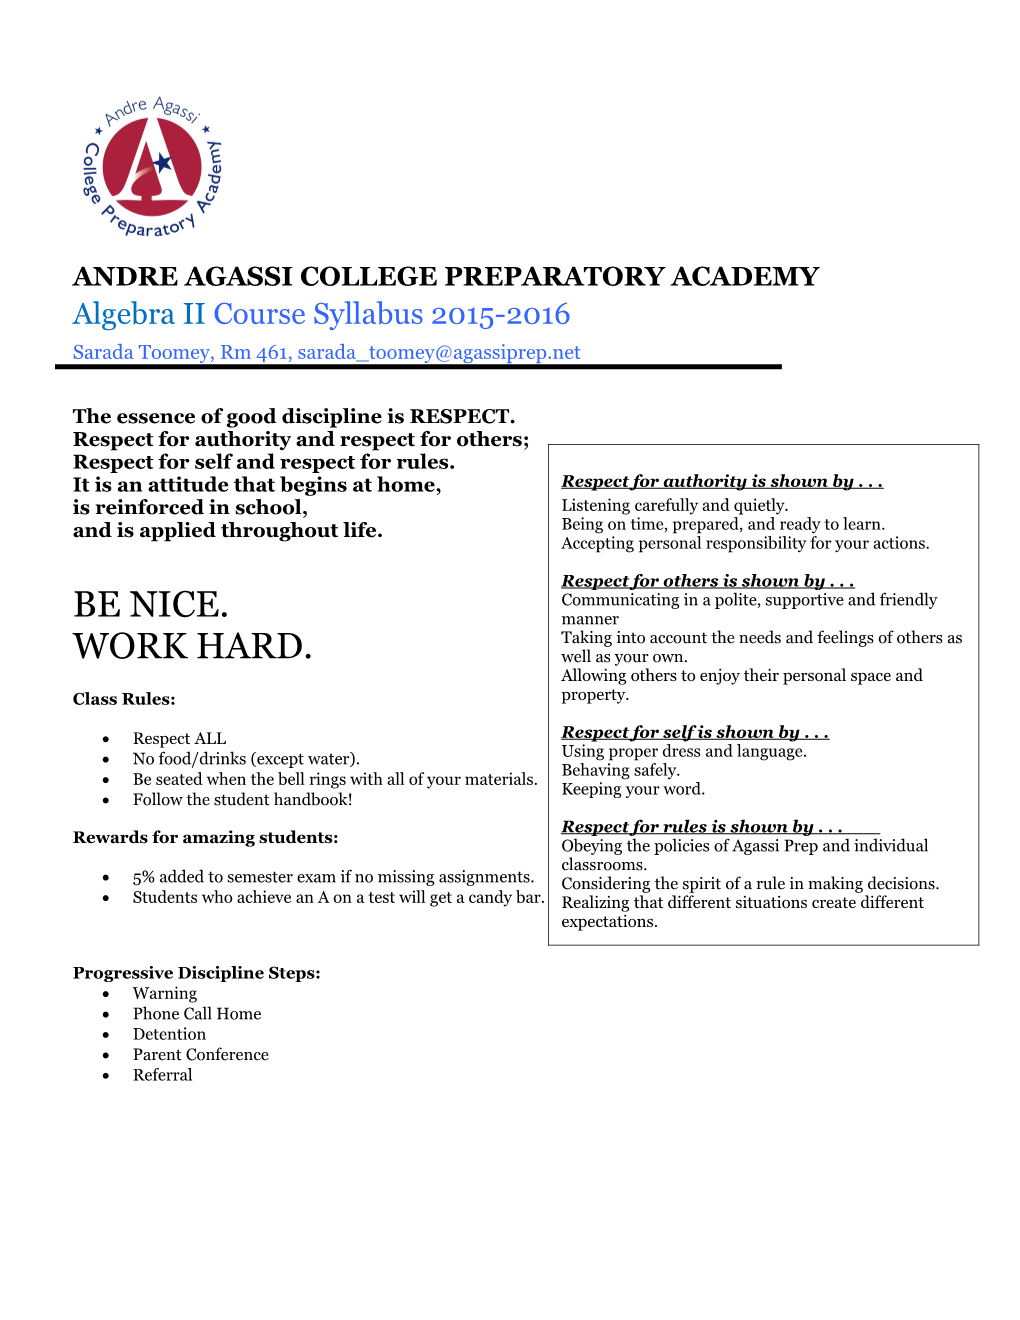 Andre Agassi College Preparatory Academy s1